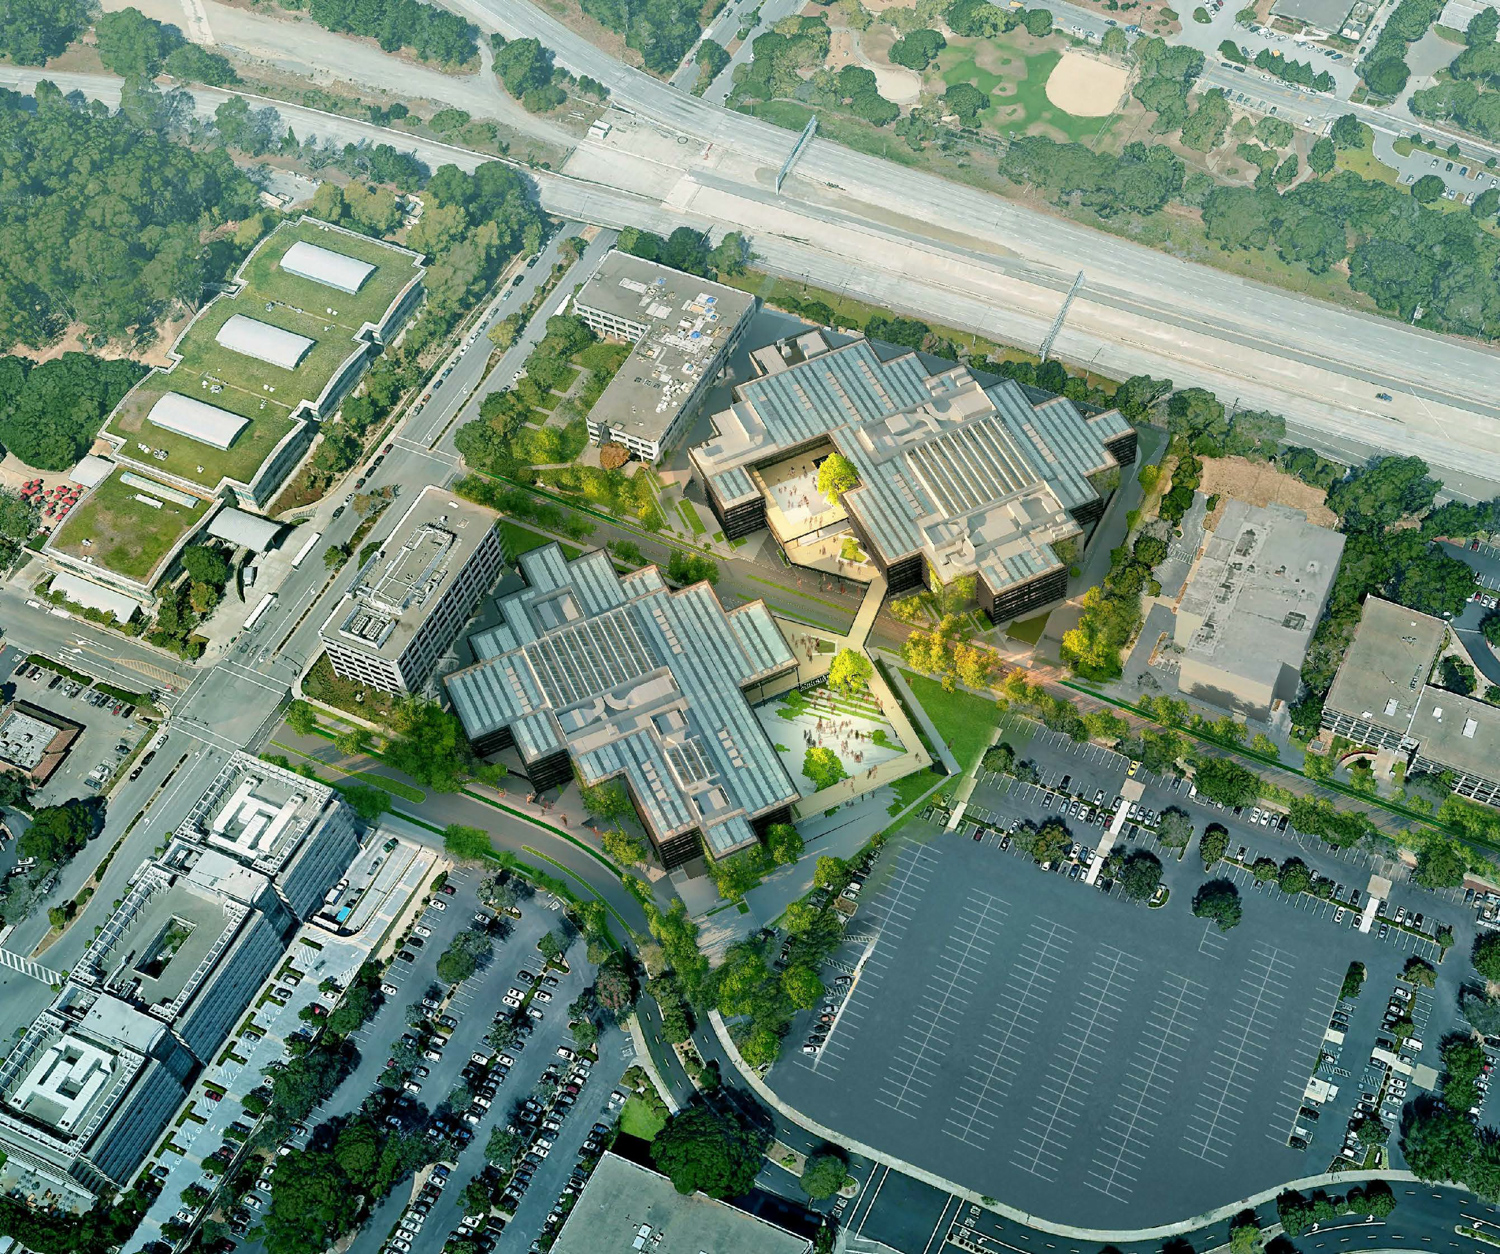 YouTube HQ Expansion aerial view, design by SHoP Architects